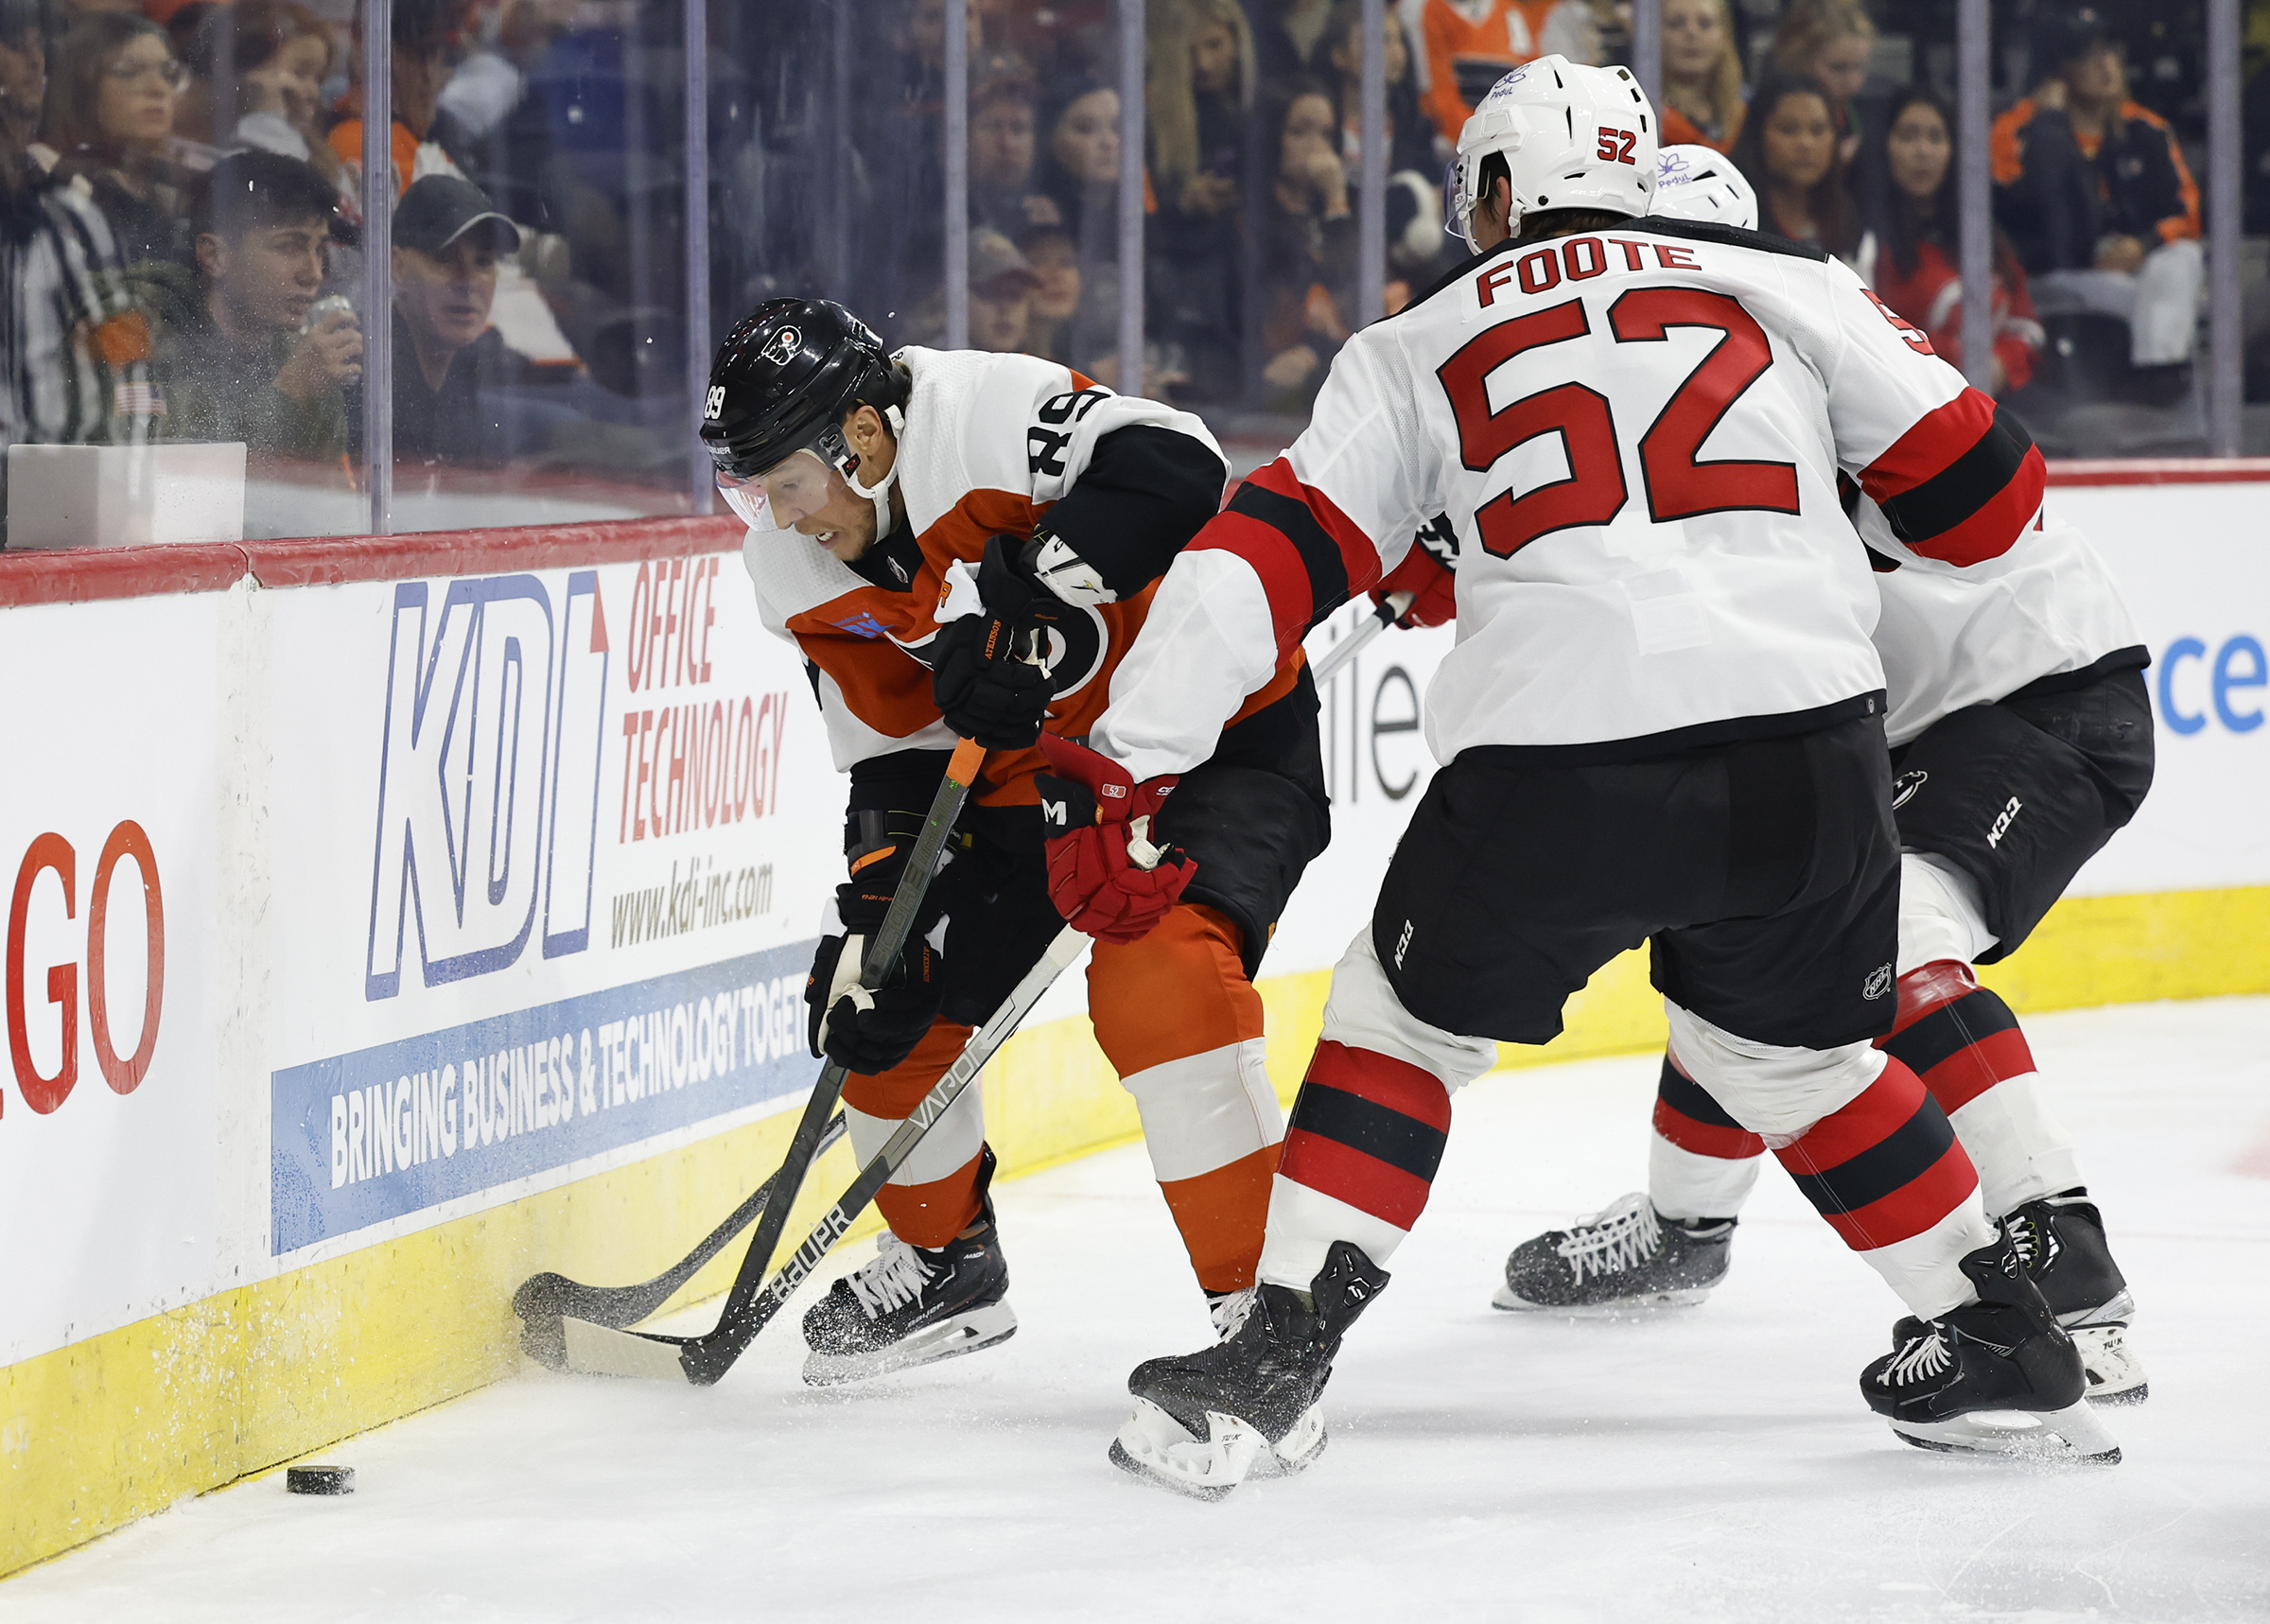 Longtime Flyers forward returns to game action after 20 months off